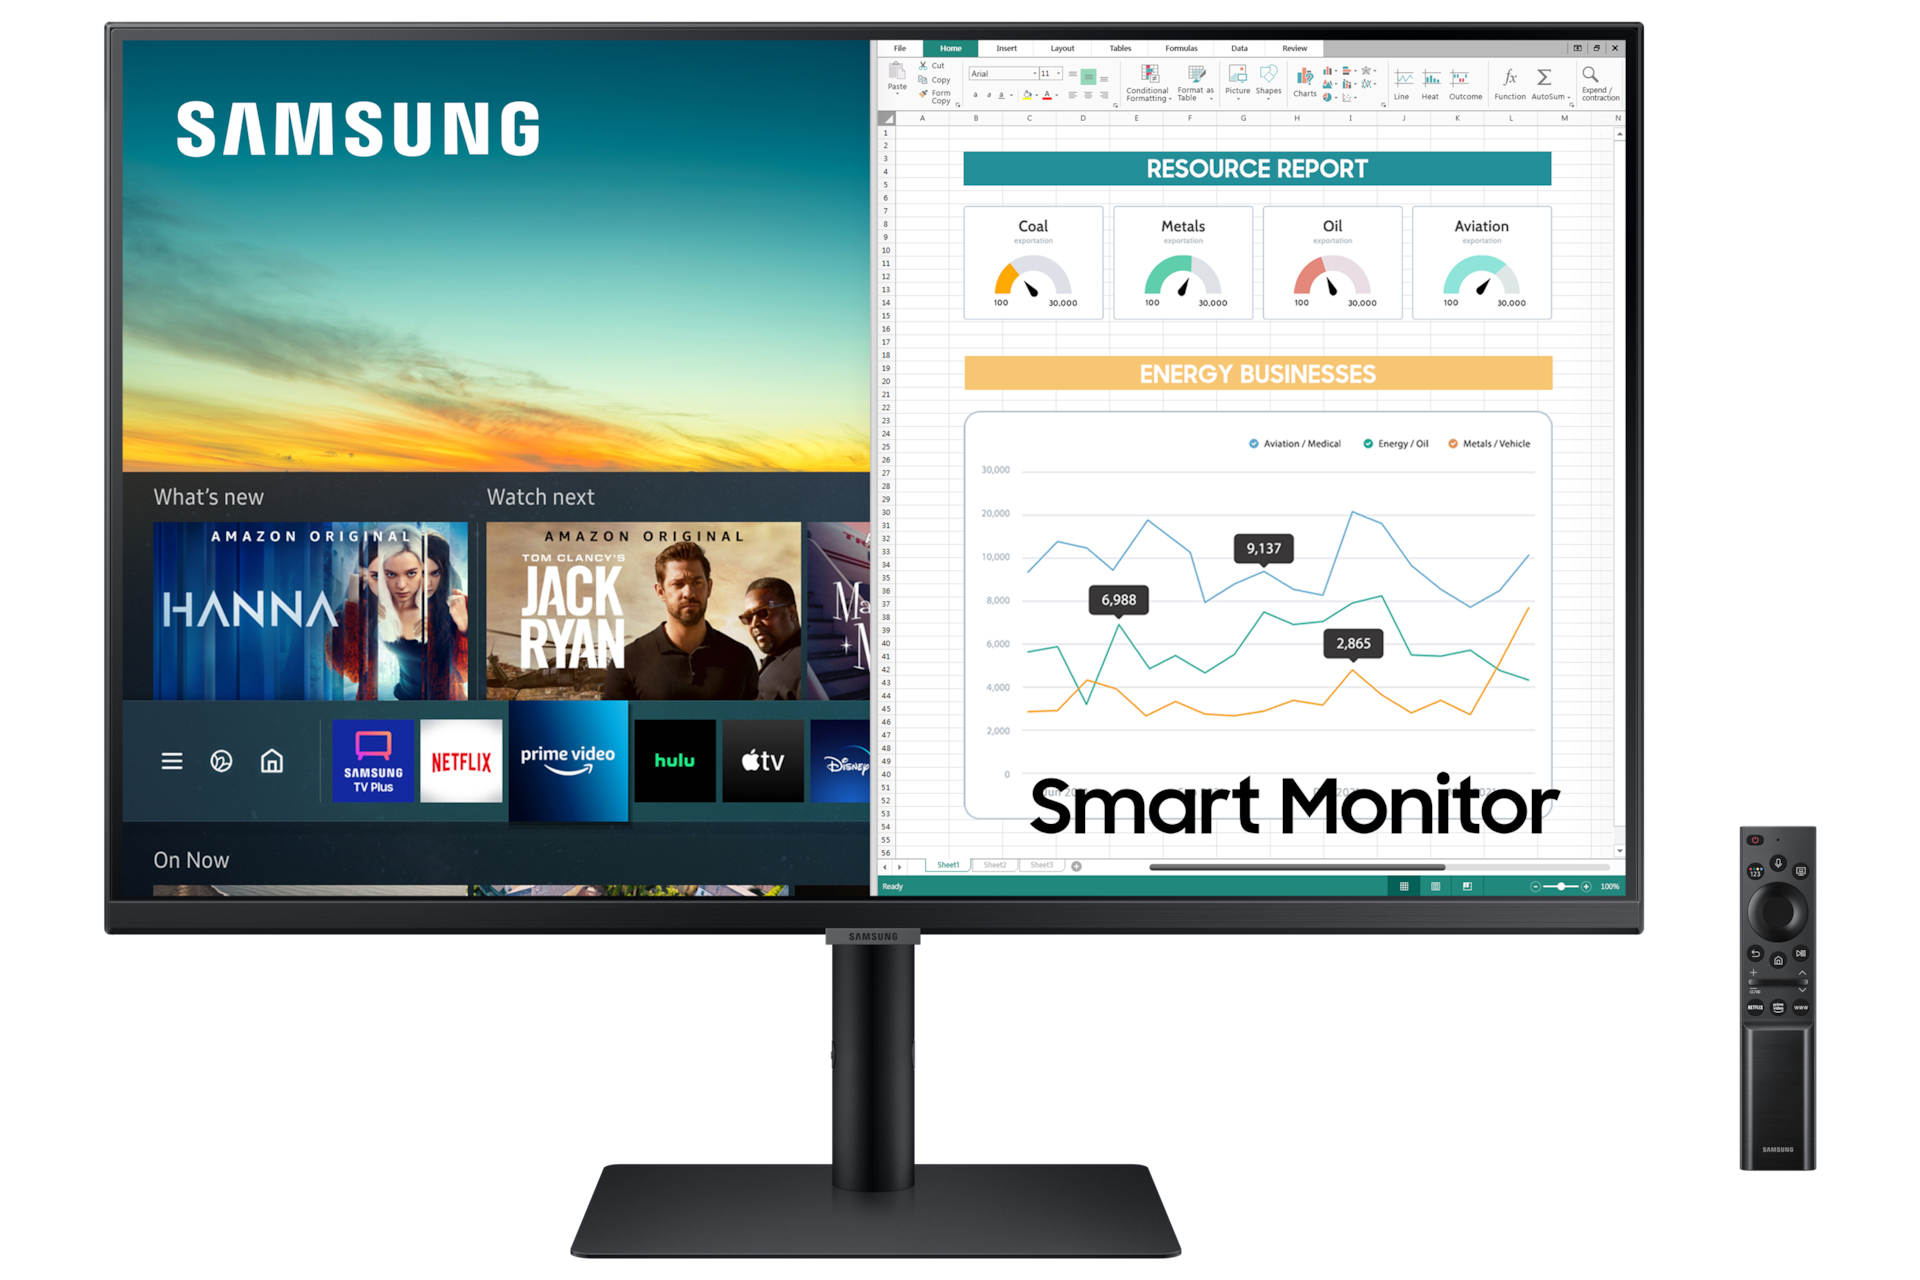 Image of Samsung Smart Monitor With Smart TV Apps and Ergonomic Design